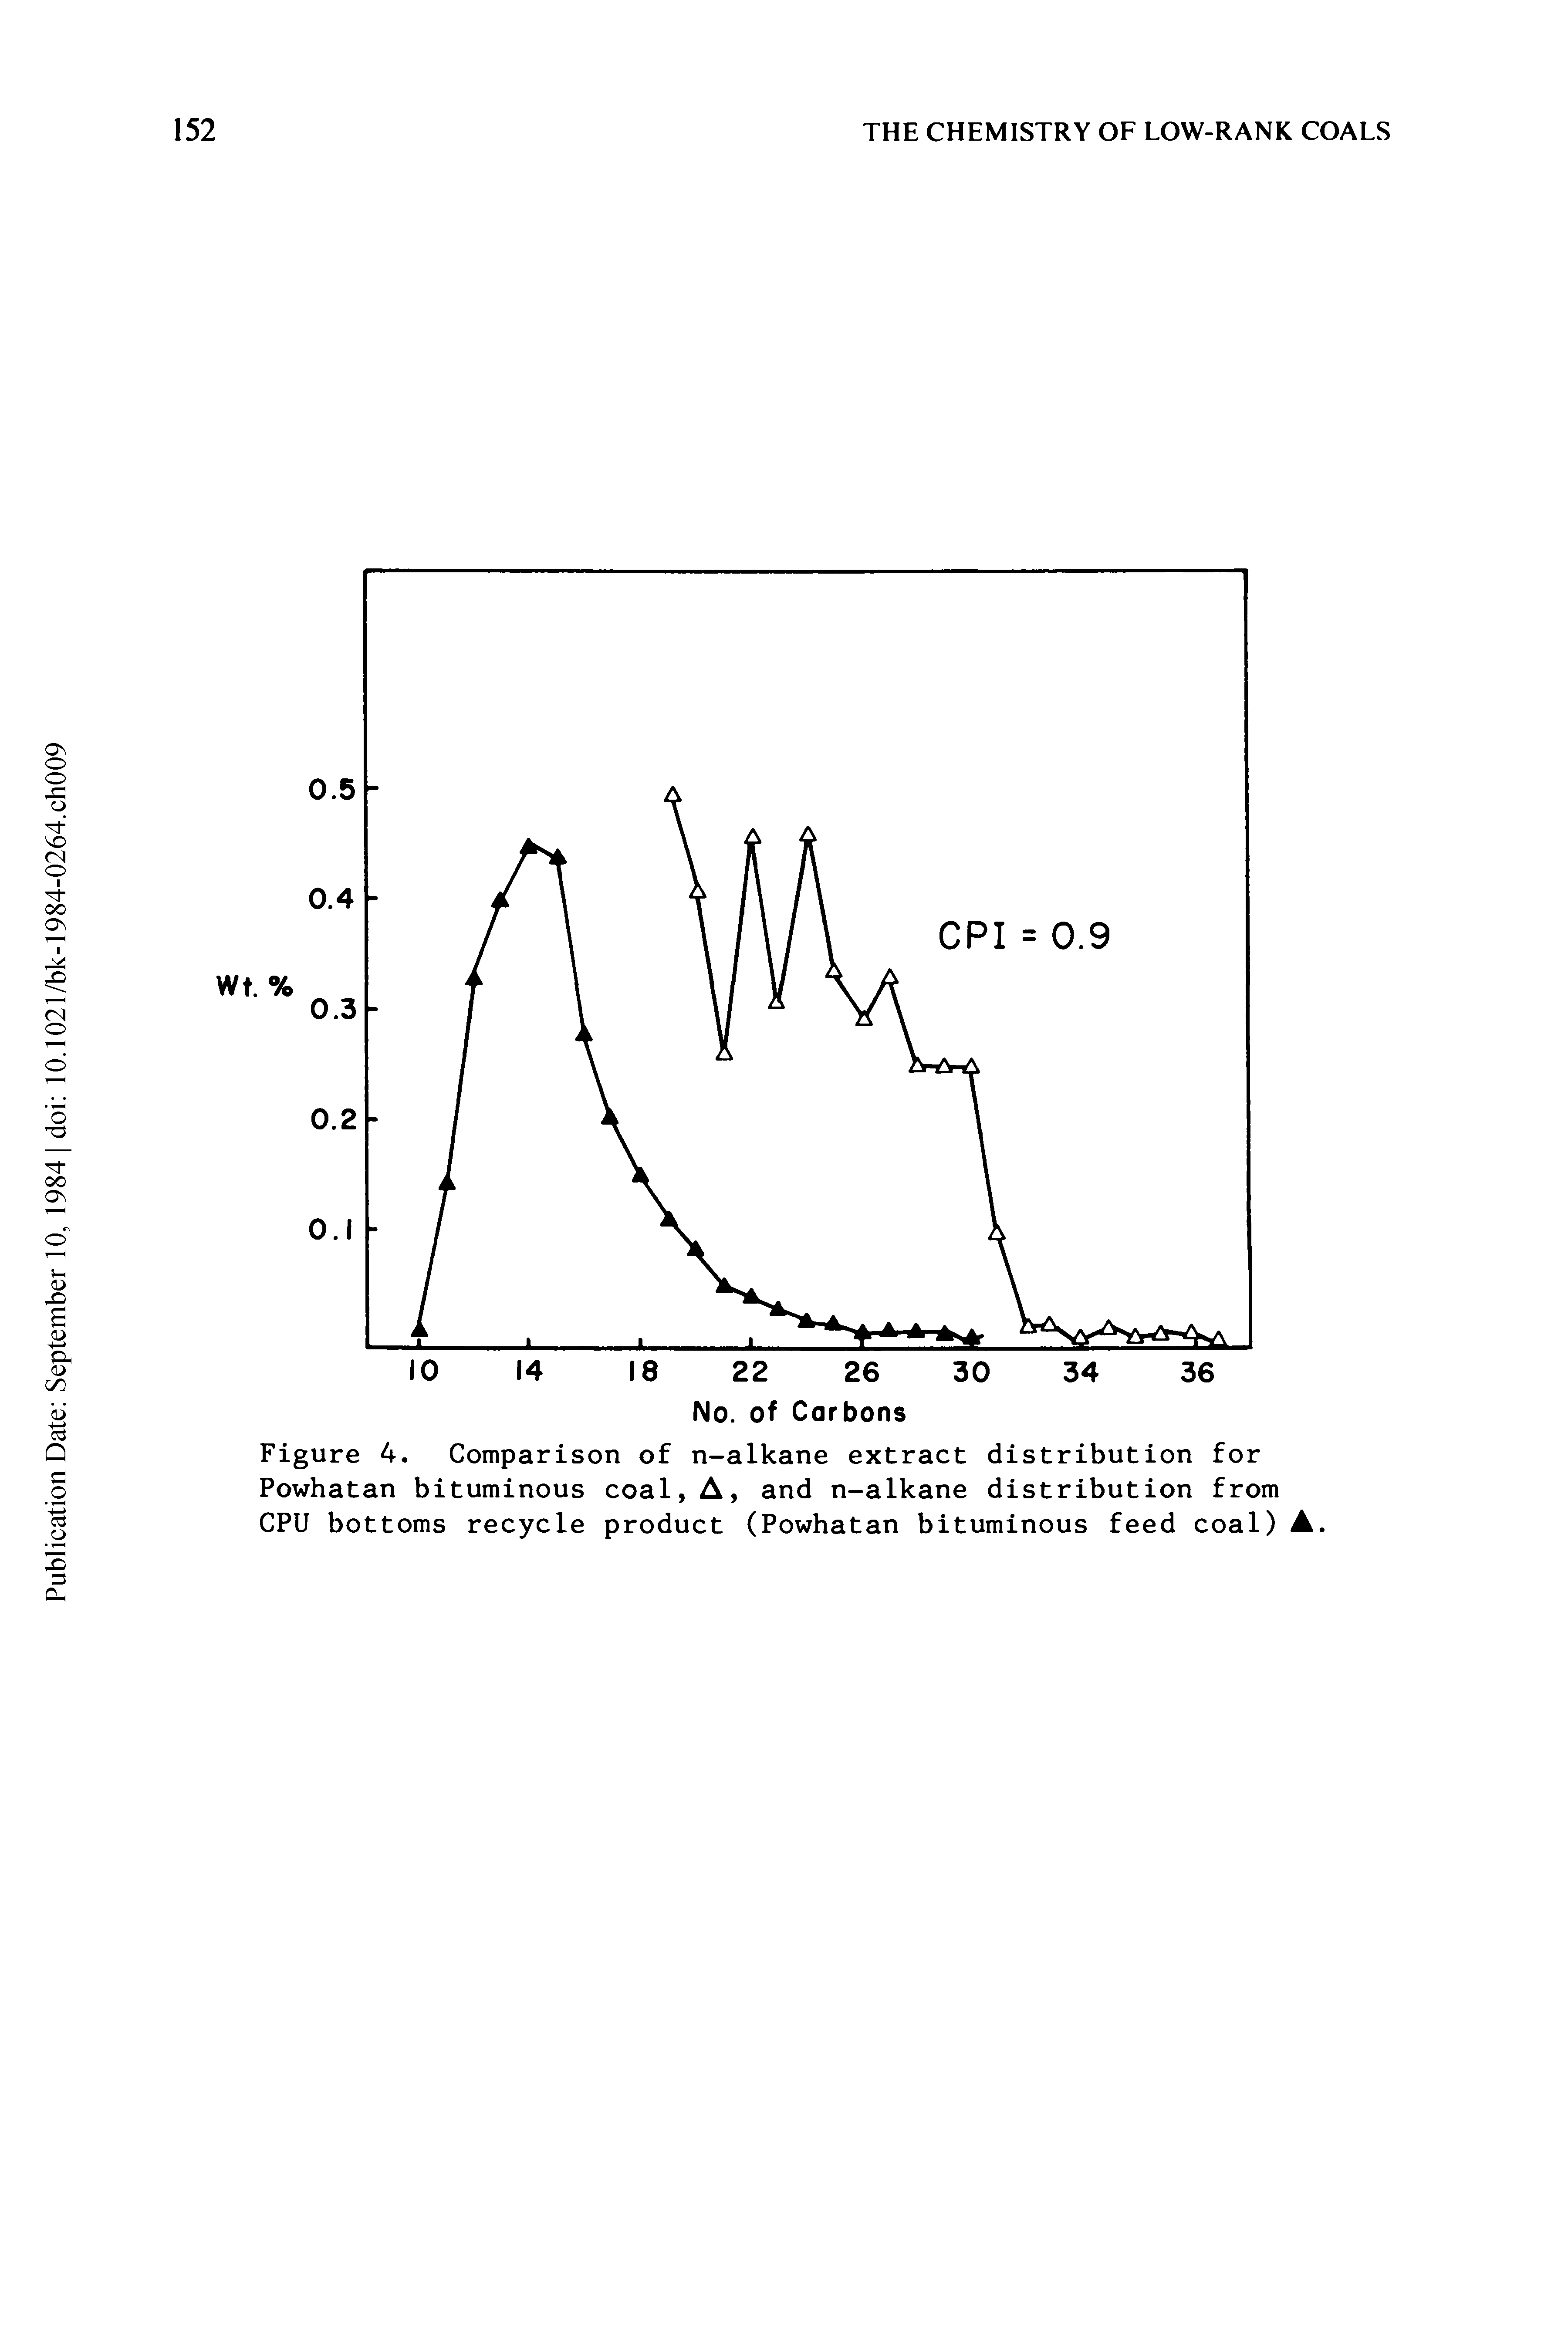 Figure 4. Comparison of n-alkane extract distribution for Powhatan bituminous coal, A, and n-alkane distribution from CPU bottoms recycle product (Powhatan bituminous feed coal) A.